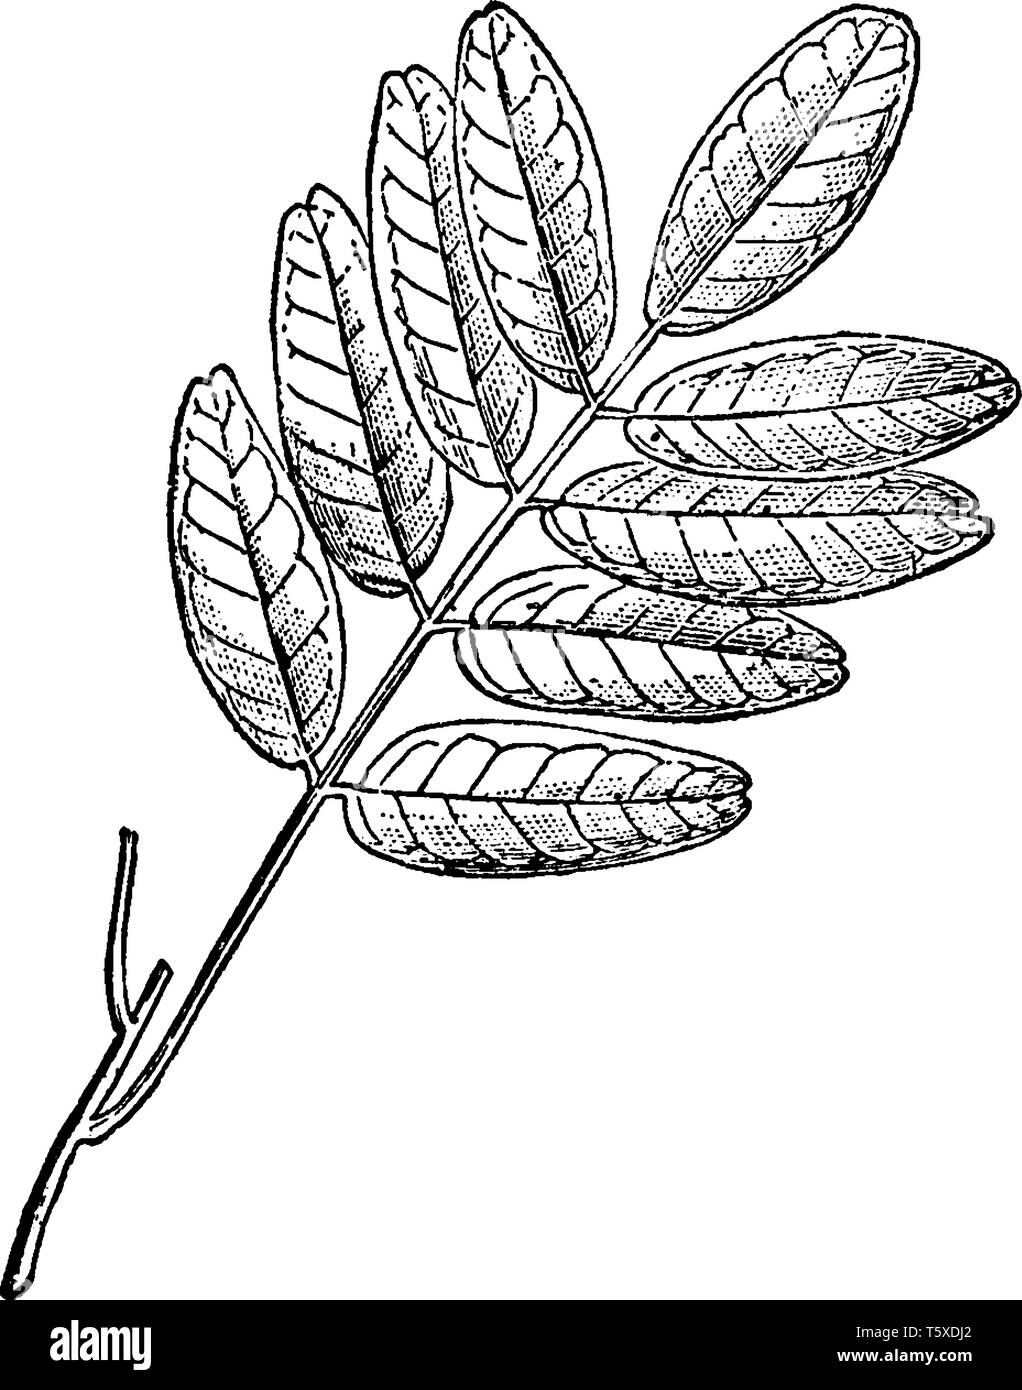 This picture represents branch of Pilocarpus is member of Rutaceae family mostly found in Neotropics of South America, vintage line drawing or engravi Stock Vector